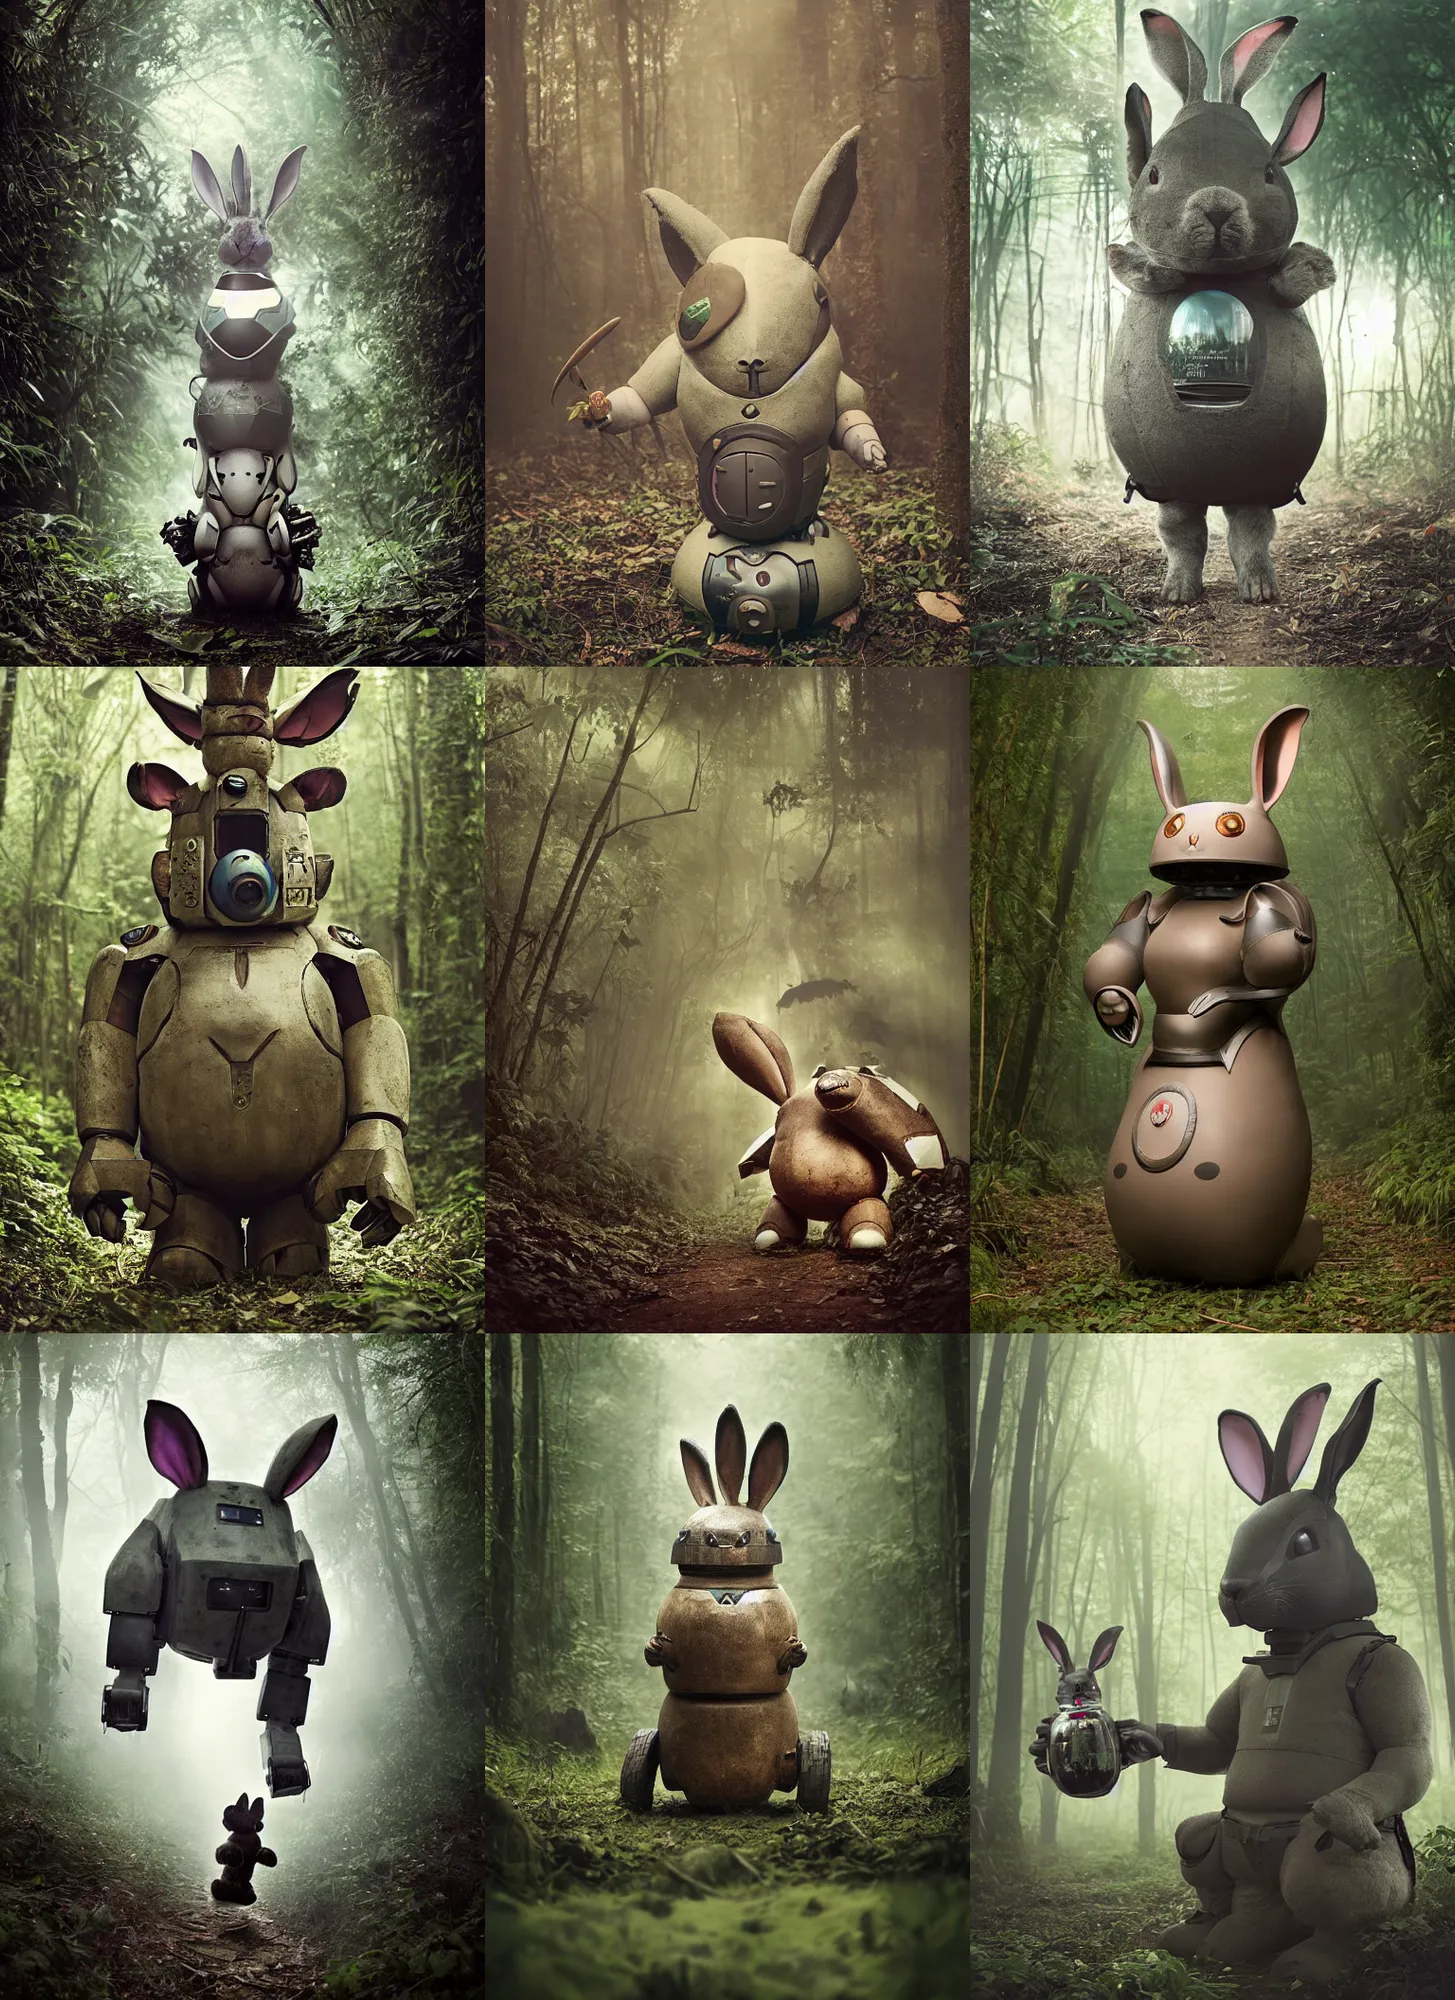 Prompt: dark night giant oversized battle rabbit robot chubby fatmech jar with big ears with rabbit sitting inside, in jungle forest, full body, nighttime, cinematic focus, polaroid photo, vintage, neutral dull colors, soft lights, foggy, overcast by oleg oprisco, by thomas peschak, by discovery channel, by victor enrich, by gregory crewdson